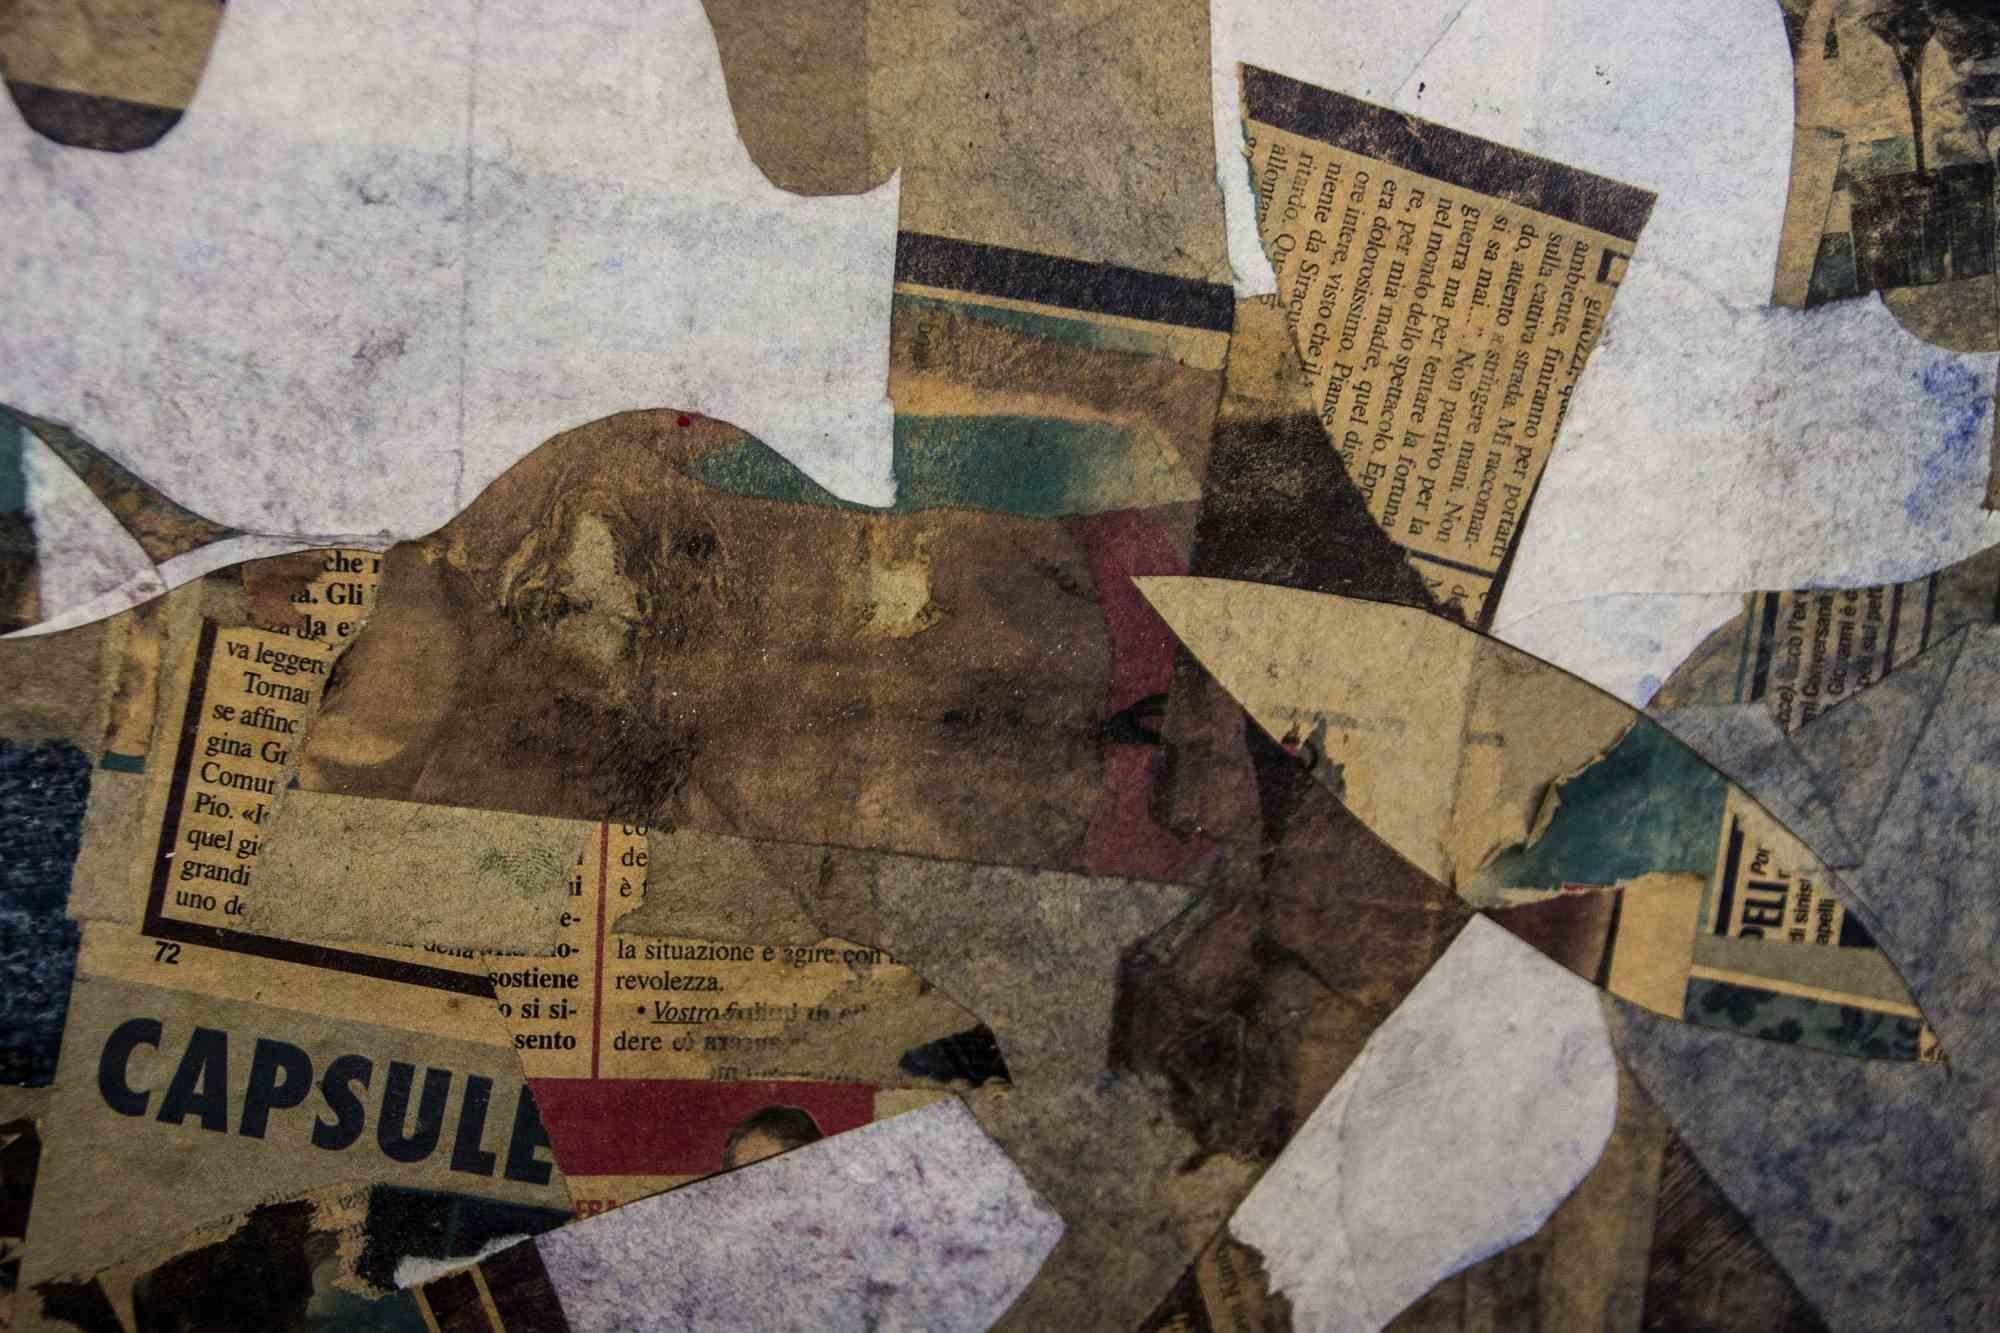 Collage of newspapers applied on canvas, realized by Massimo Greco in 2020.

Hans signed on rear by the Artist.

Certificate of Authenticity b the Artist on photograph.

Excellent condition. 
